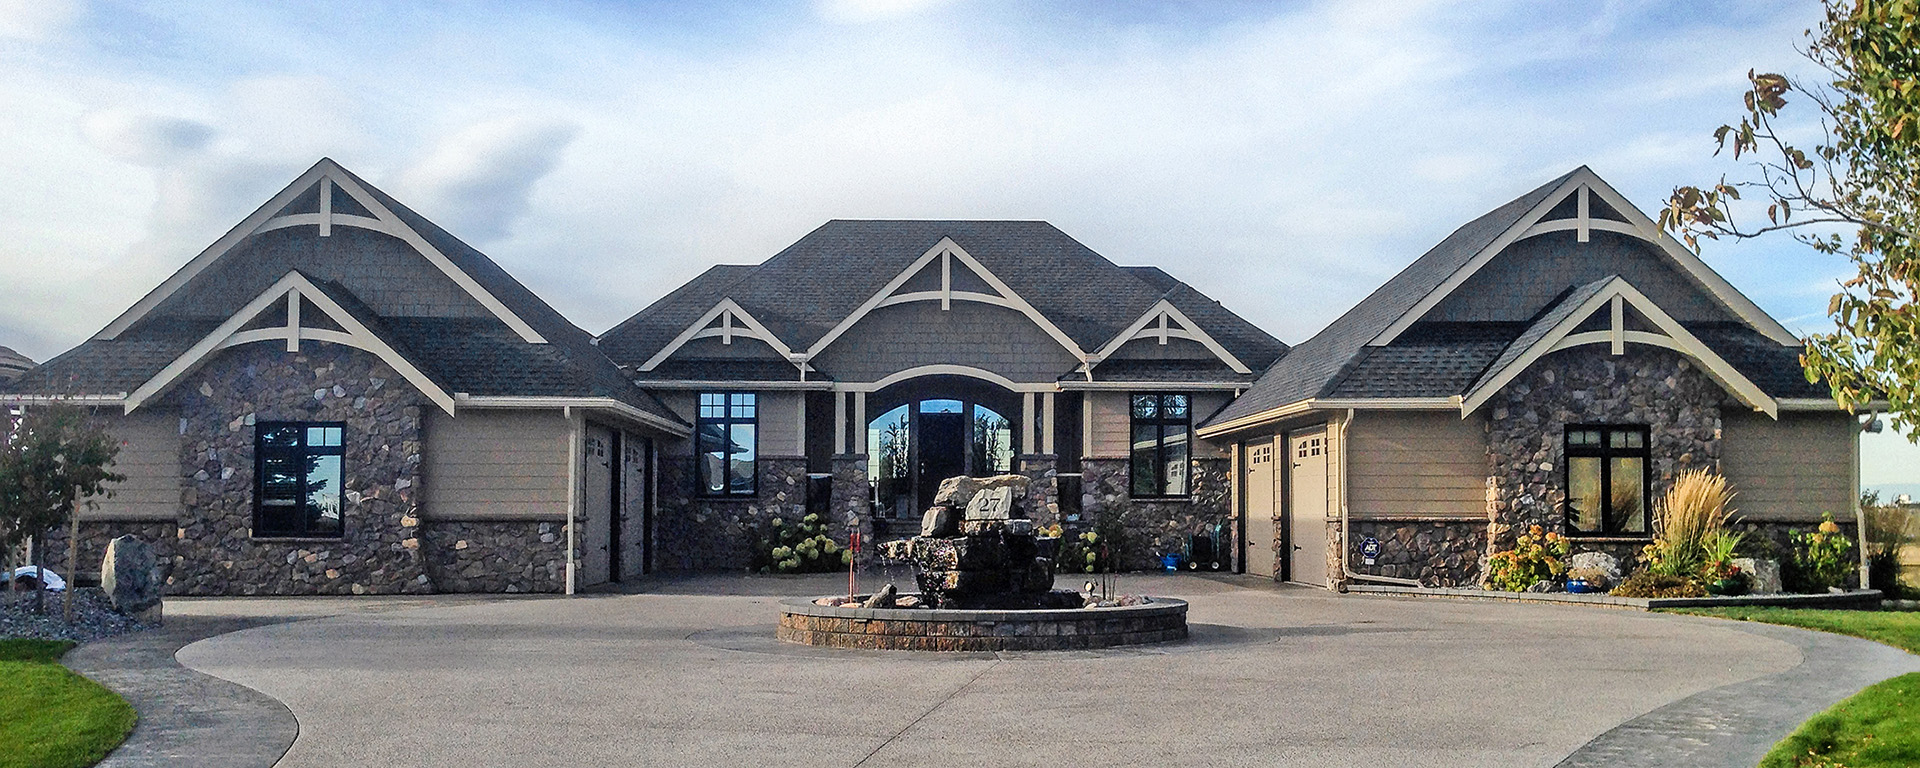 The front of a large home with dark grey shingle roofing 